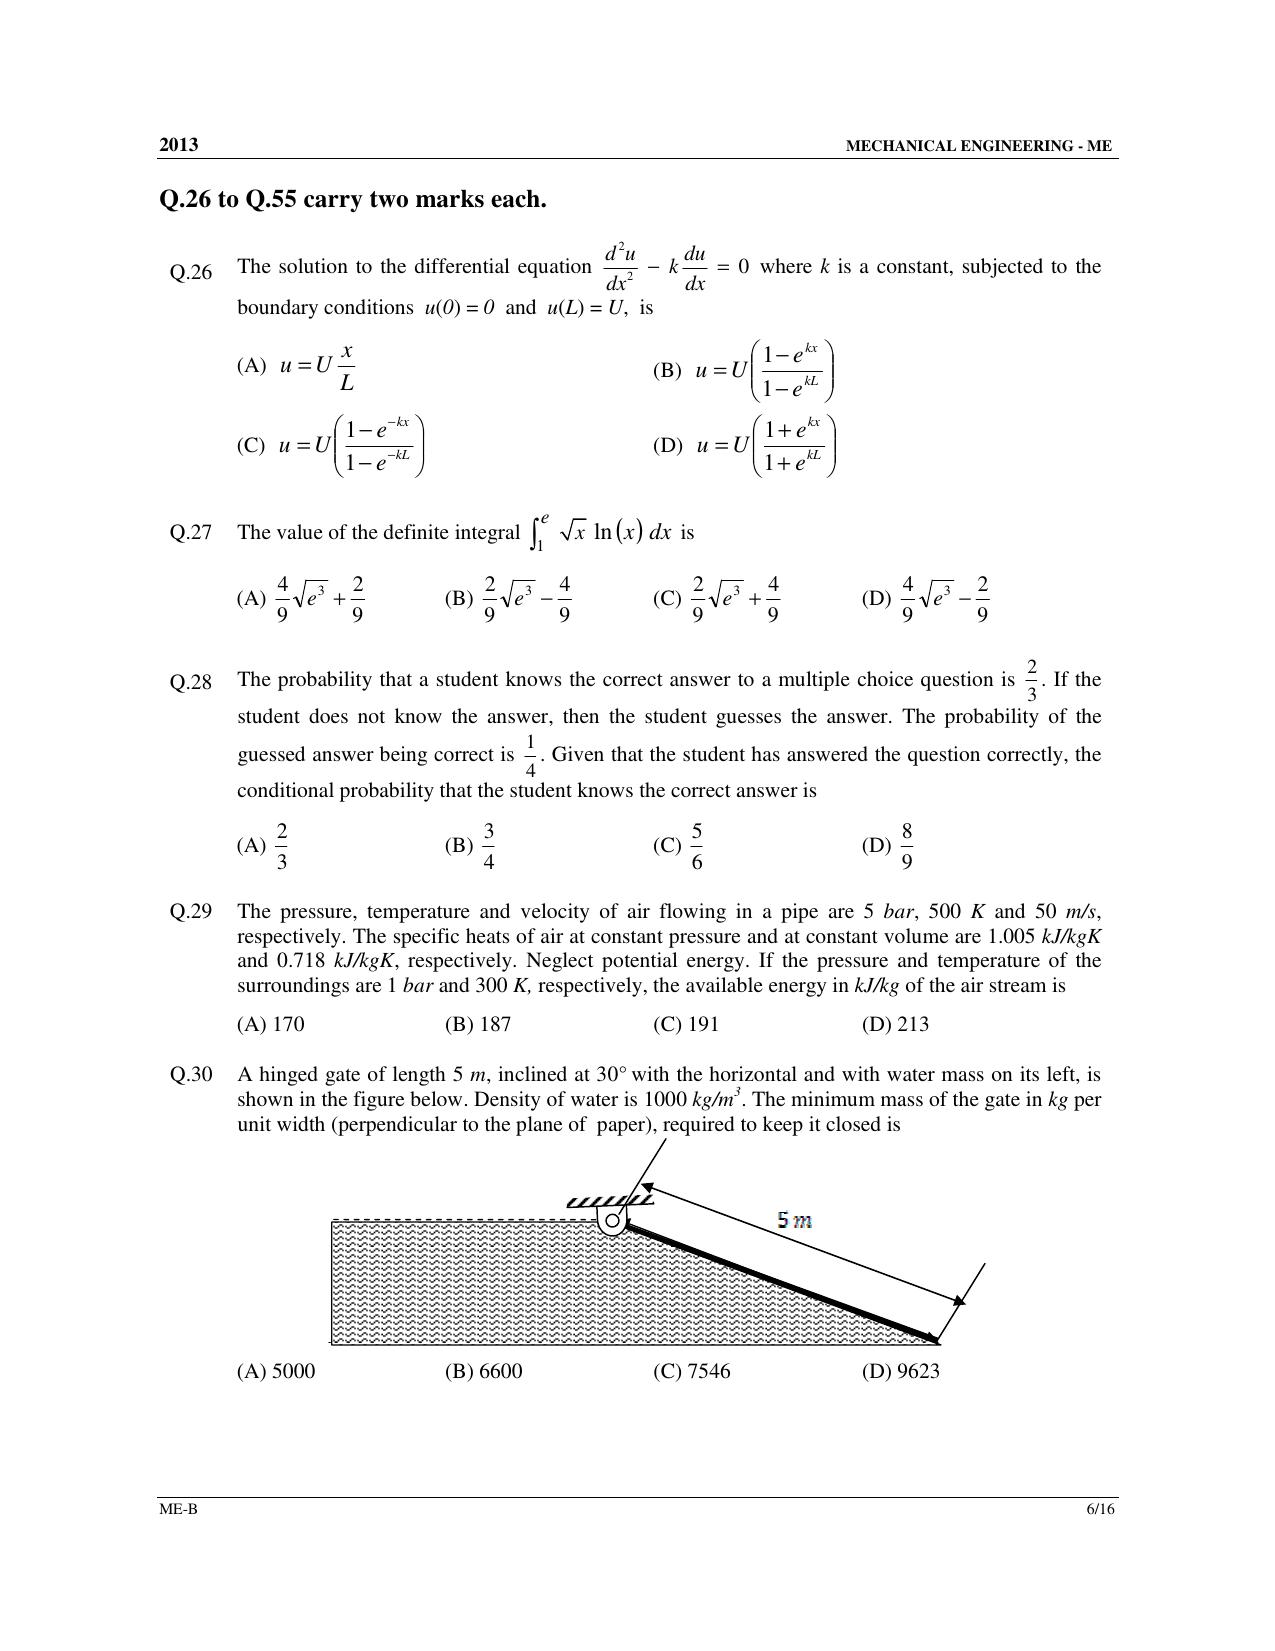 GATE 2013 Mechanical Engineering (ME) Question Paper with Answer Key - Page 21